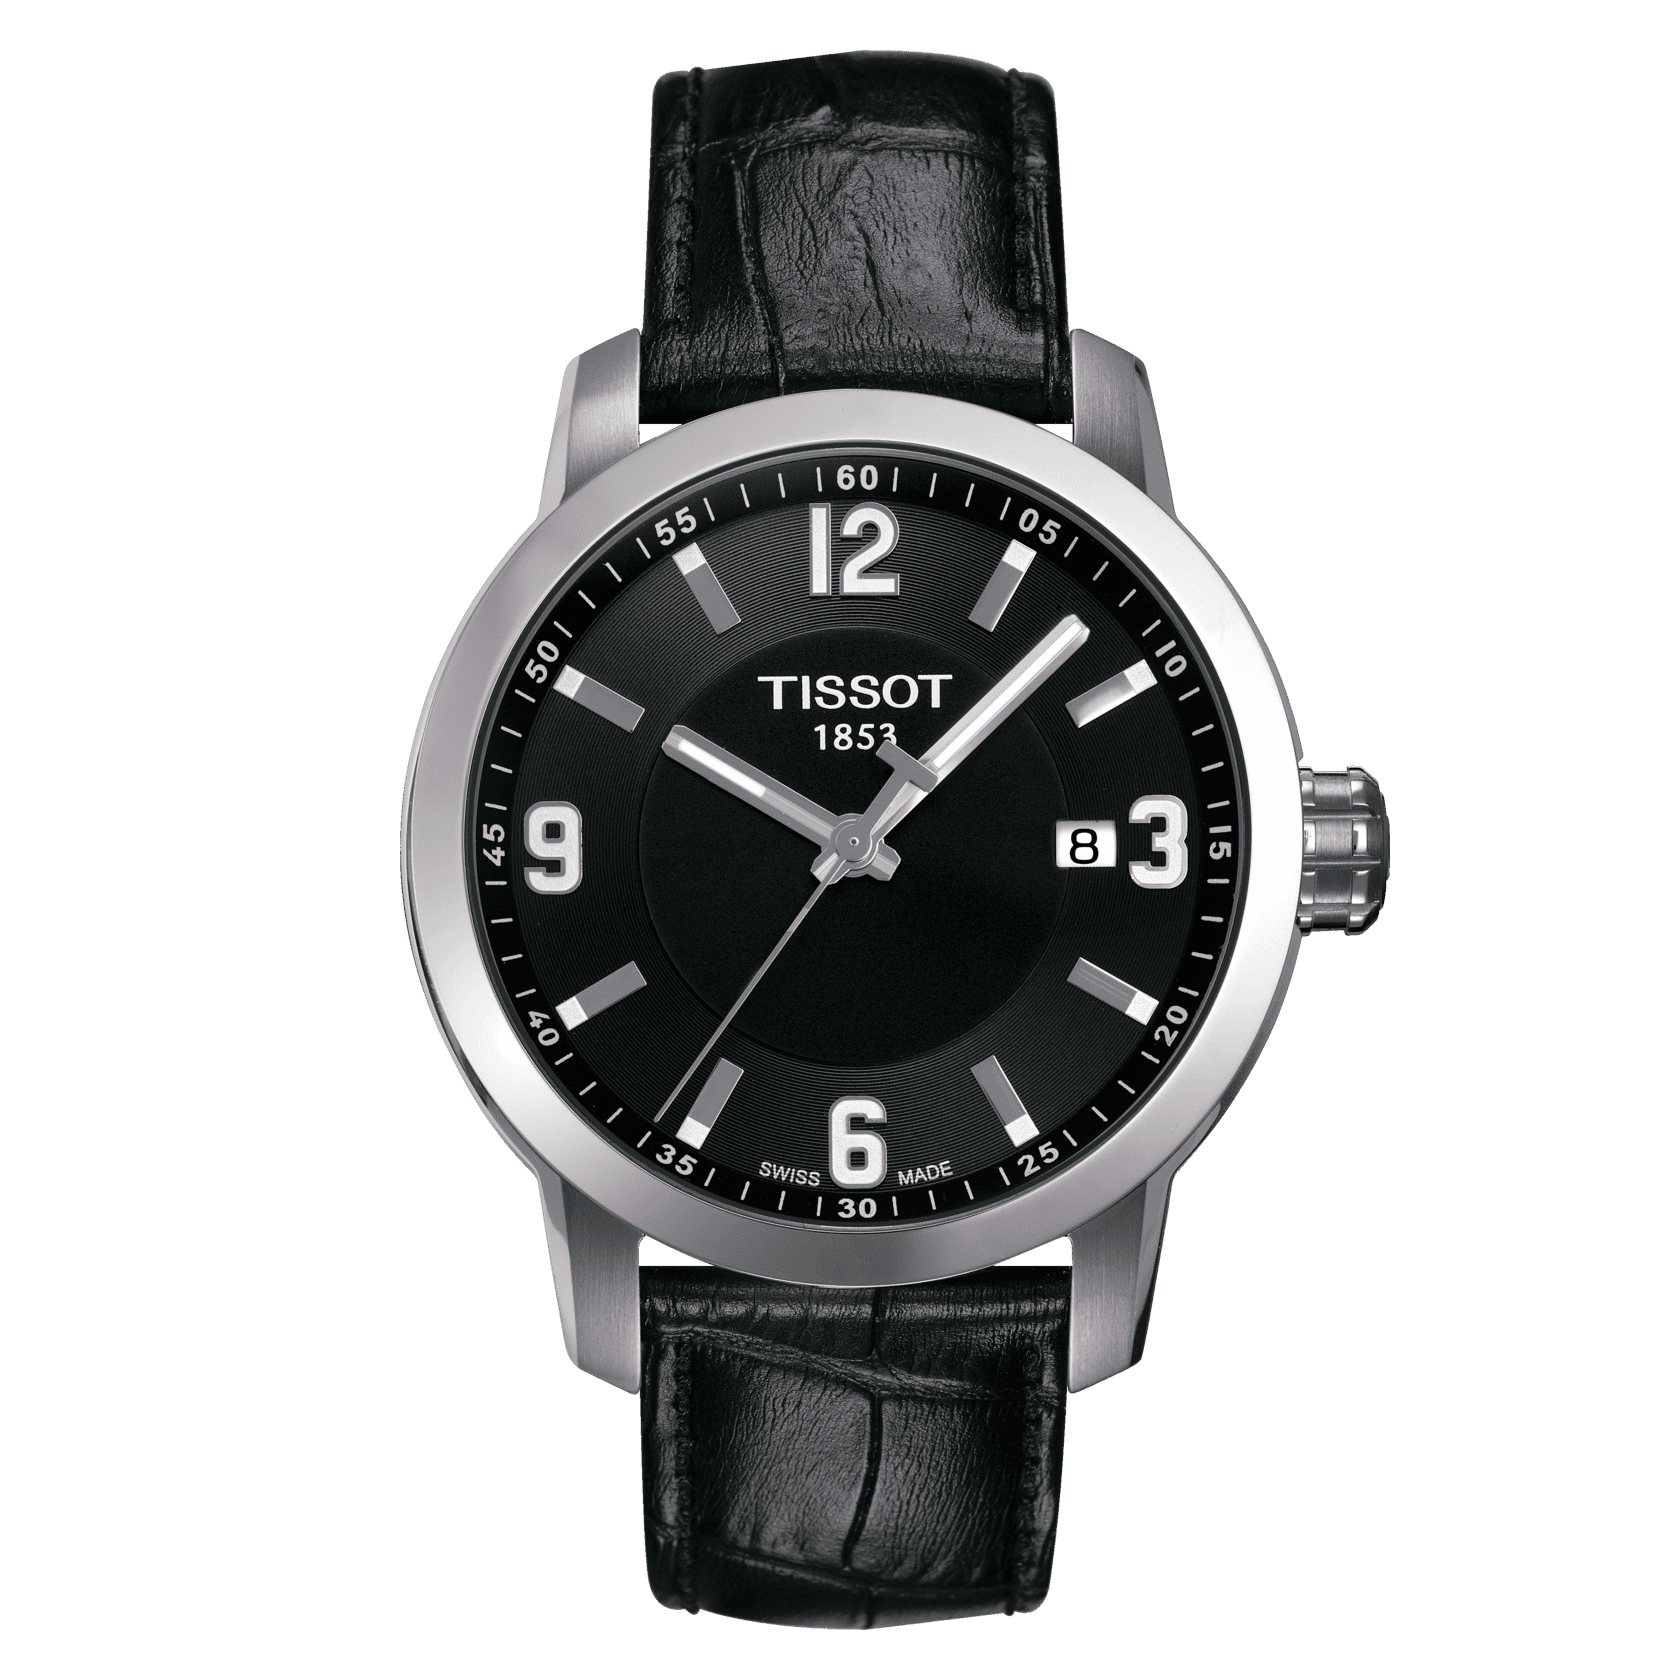 TISSOT PRC 200 (T055.410.16.057.00)
316L stainless steel case
screw-down crown and caseback
Scratch-resistant sapphire crystal
Black Dial with arabic and indexes
Quartz
Black Leather Strap with butterfly clasp
Water-resistant up to a pressure of 20